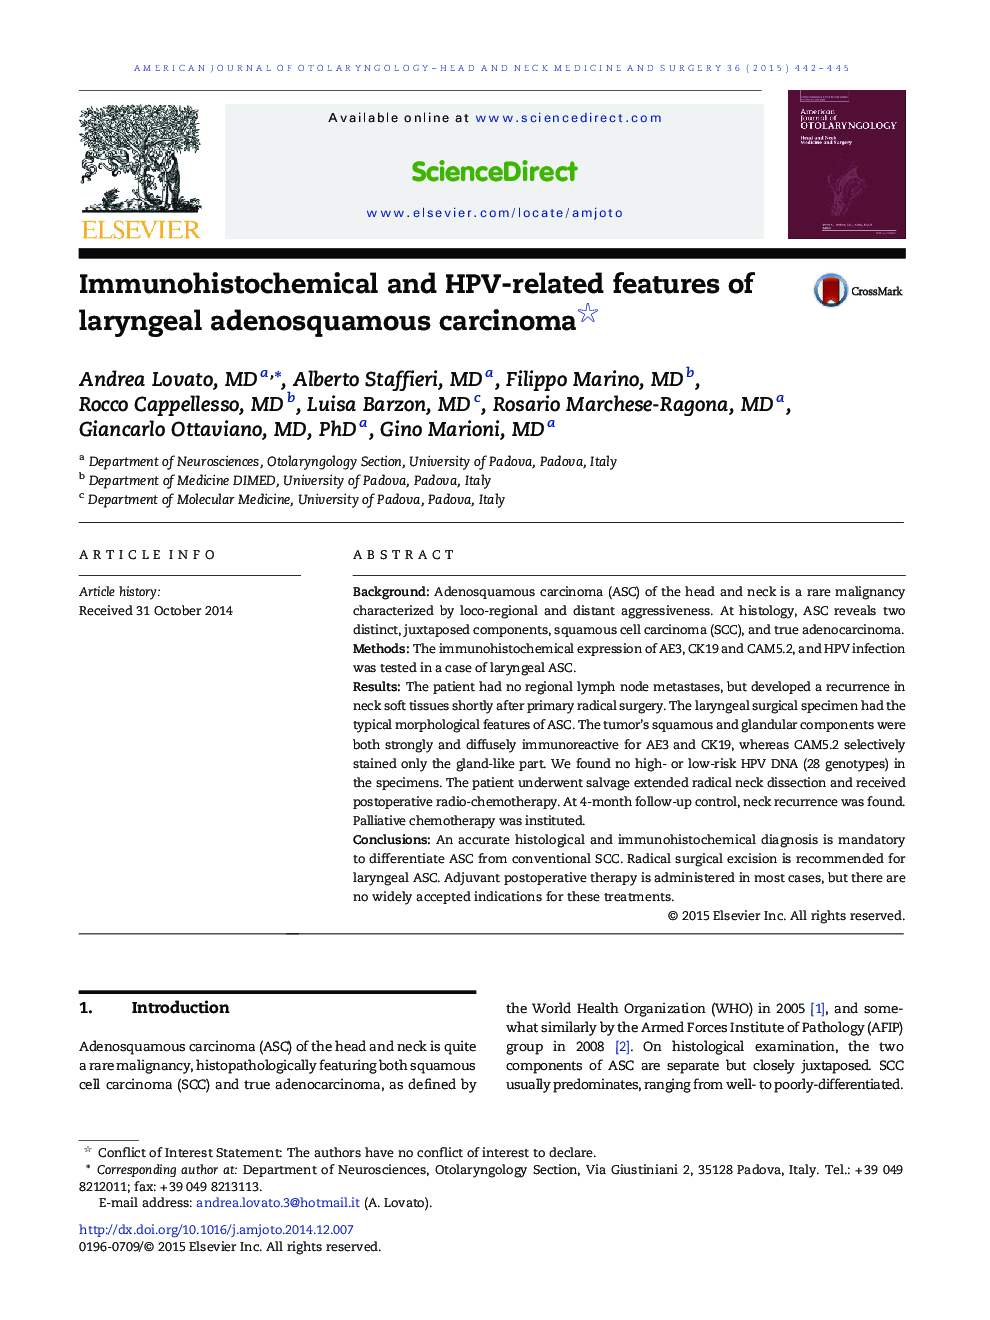 Immunohistochemical and HPV-related features of laryngeal adenosquamous carcinoma 